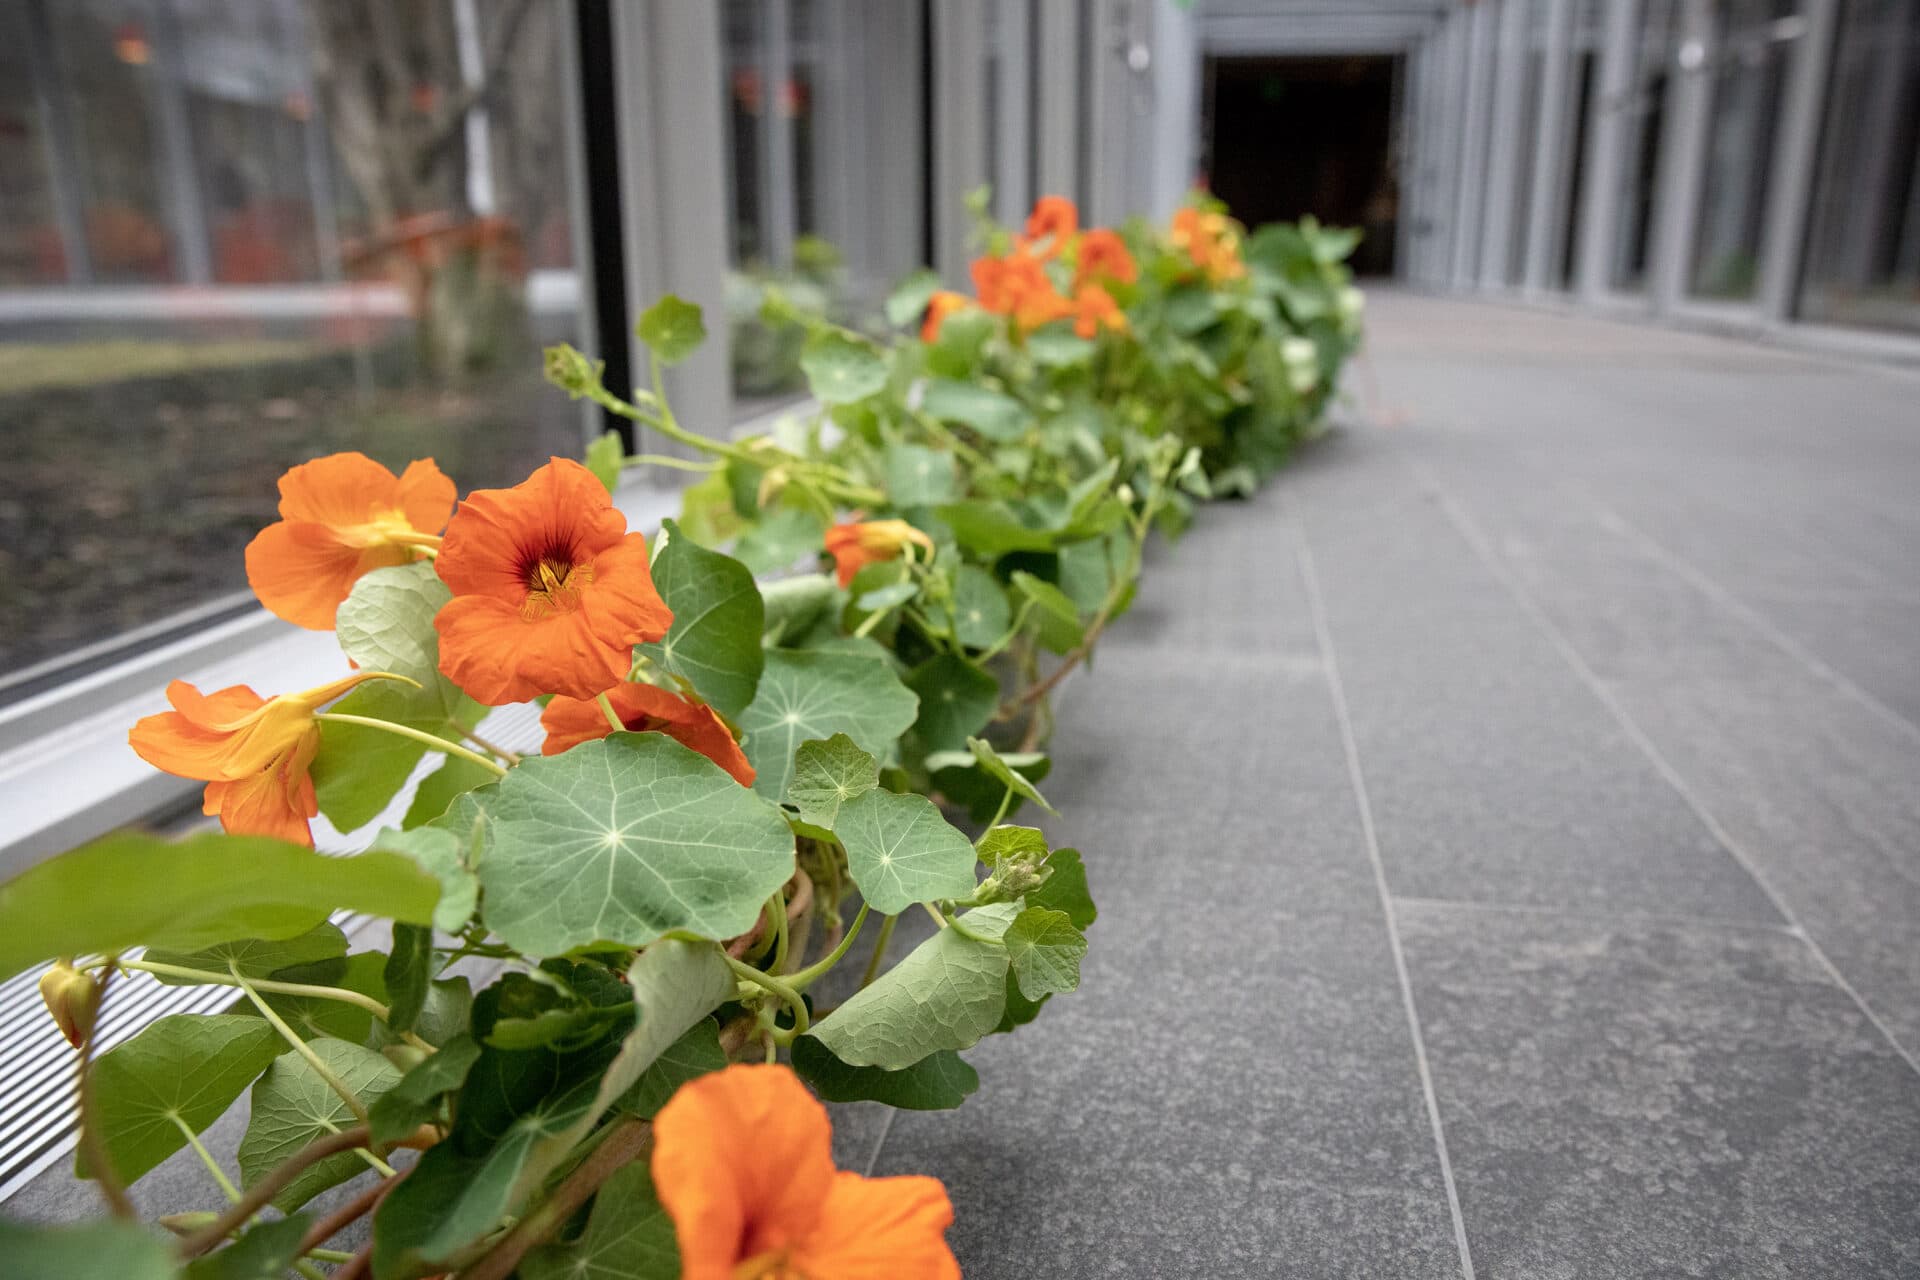 A 20-foot long nasturtium plant lies on the floor of the Isabella Stewart Gardner Museum, waiting to be moved into the courtyard for the annual Hanging Nasturtiums installation. (Robin Lubbock/WBUR)